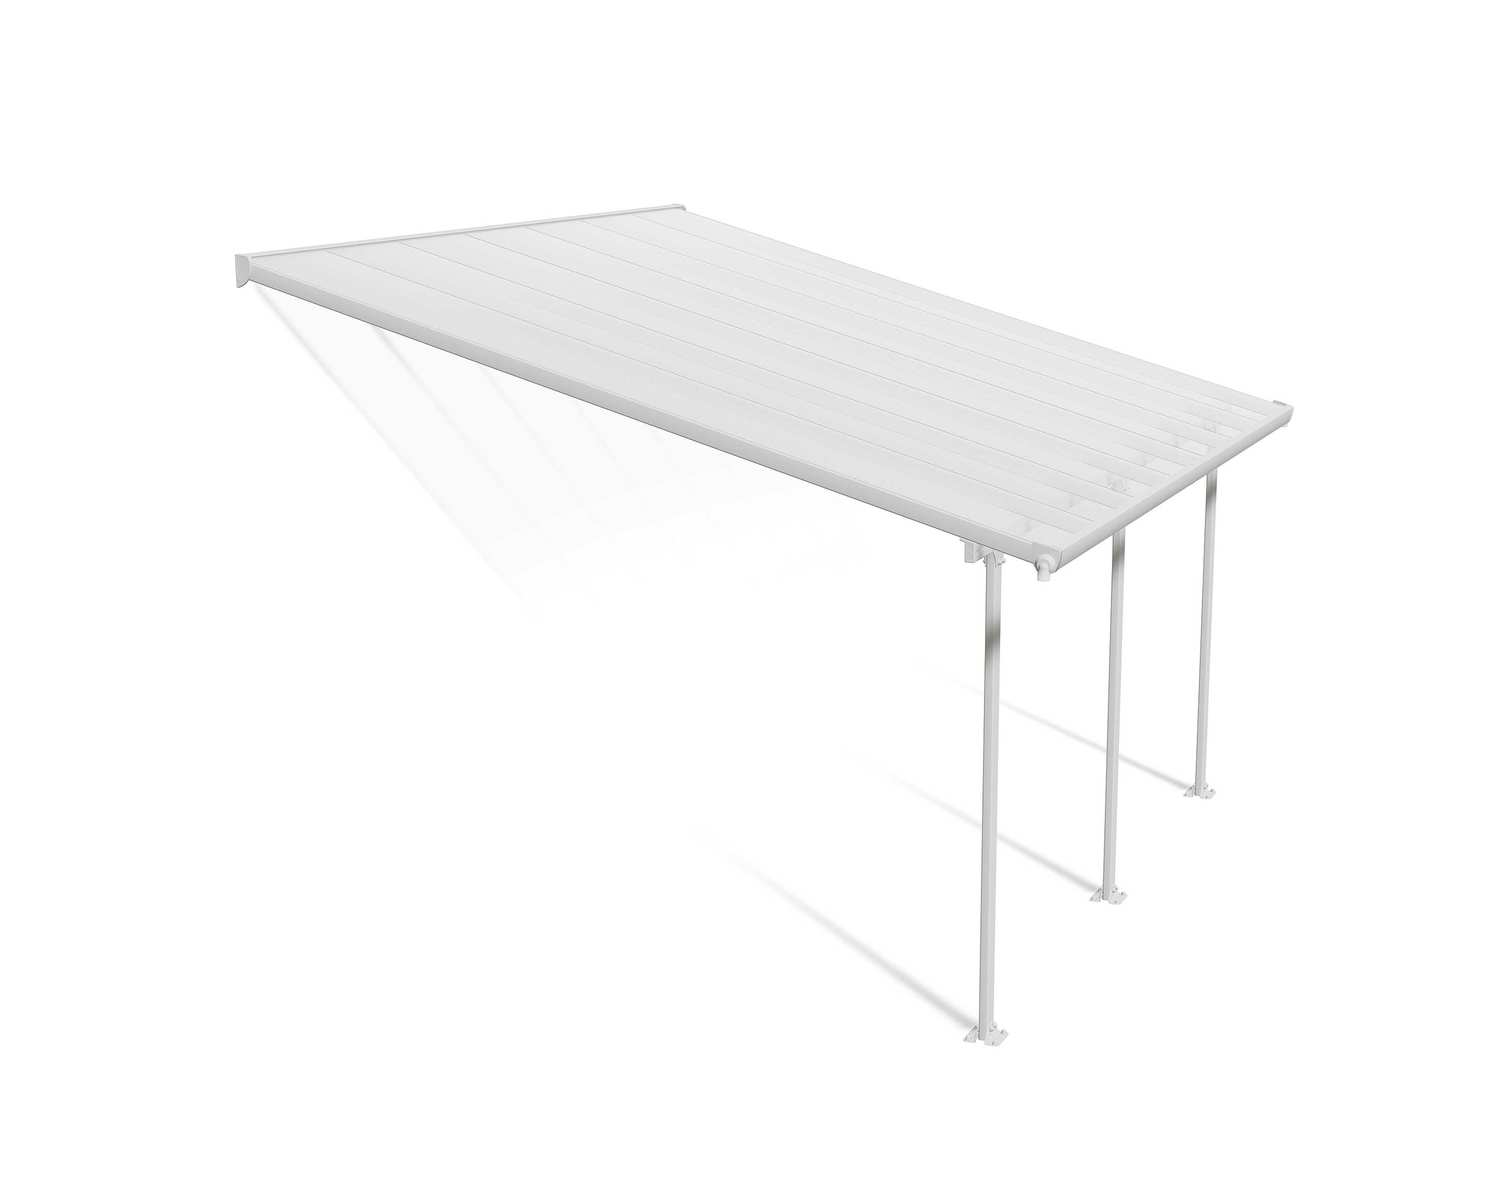 Feria 13 ft. x 14 ft. White Aluminium Patio Cover With 3 Posts, White Twin-Wall Polycarbonate Roof Panels.